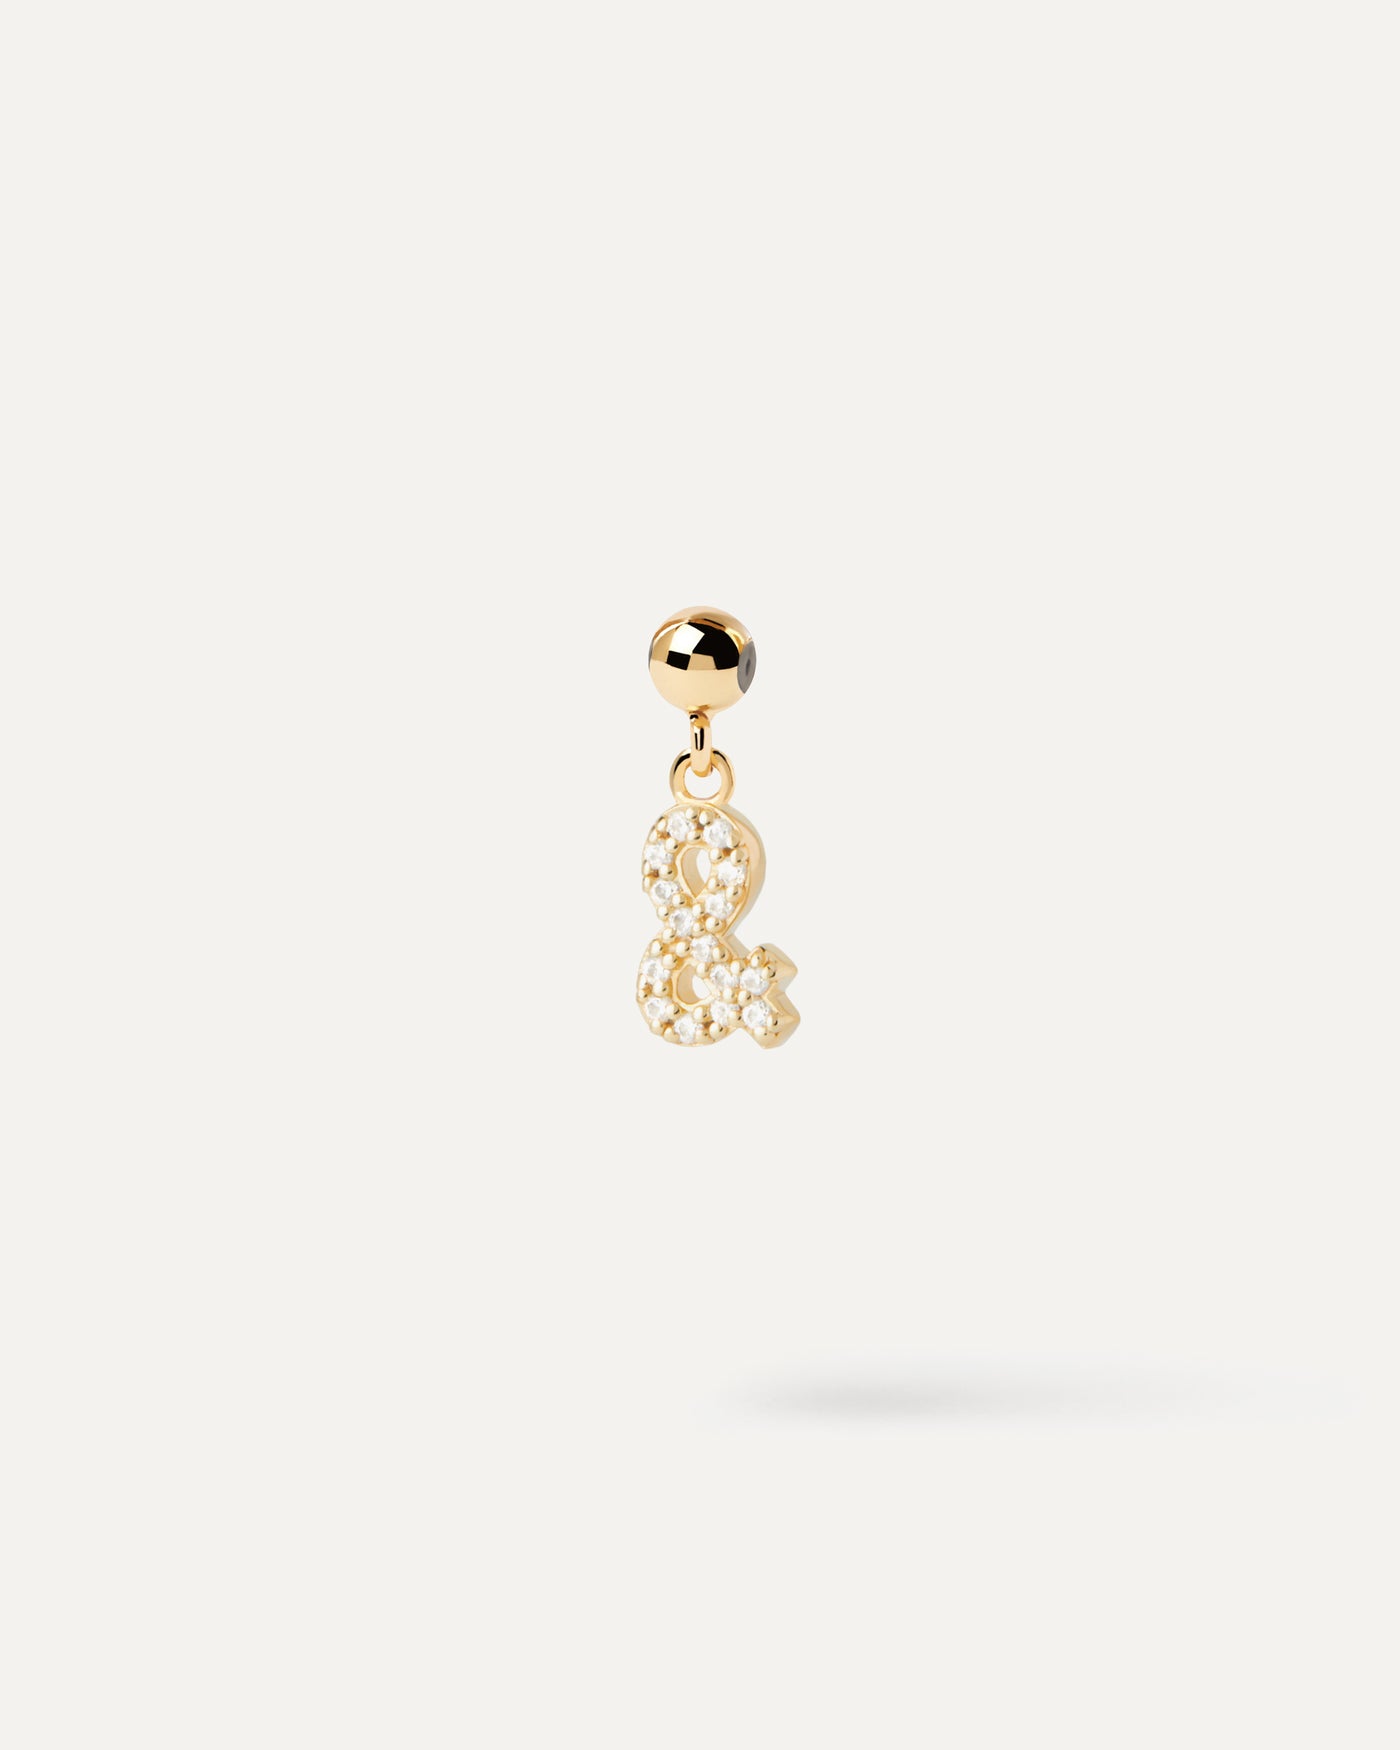 2023 Selection | Ampersand Charm. Get the latest arrival from PDPAOLA. Place your order safely and get this Best Seller. Free Shipping.